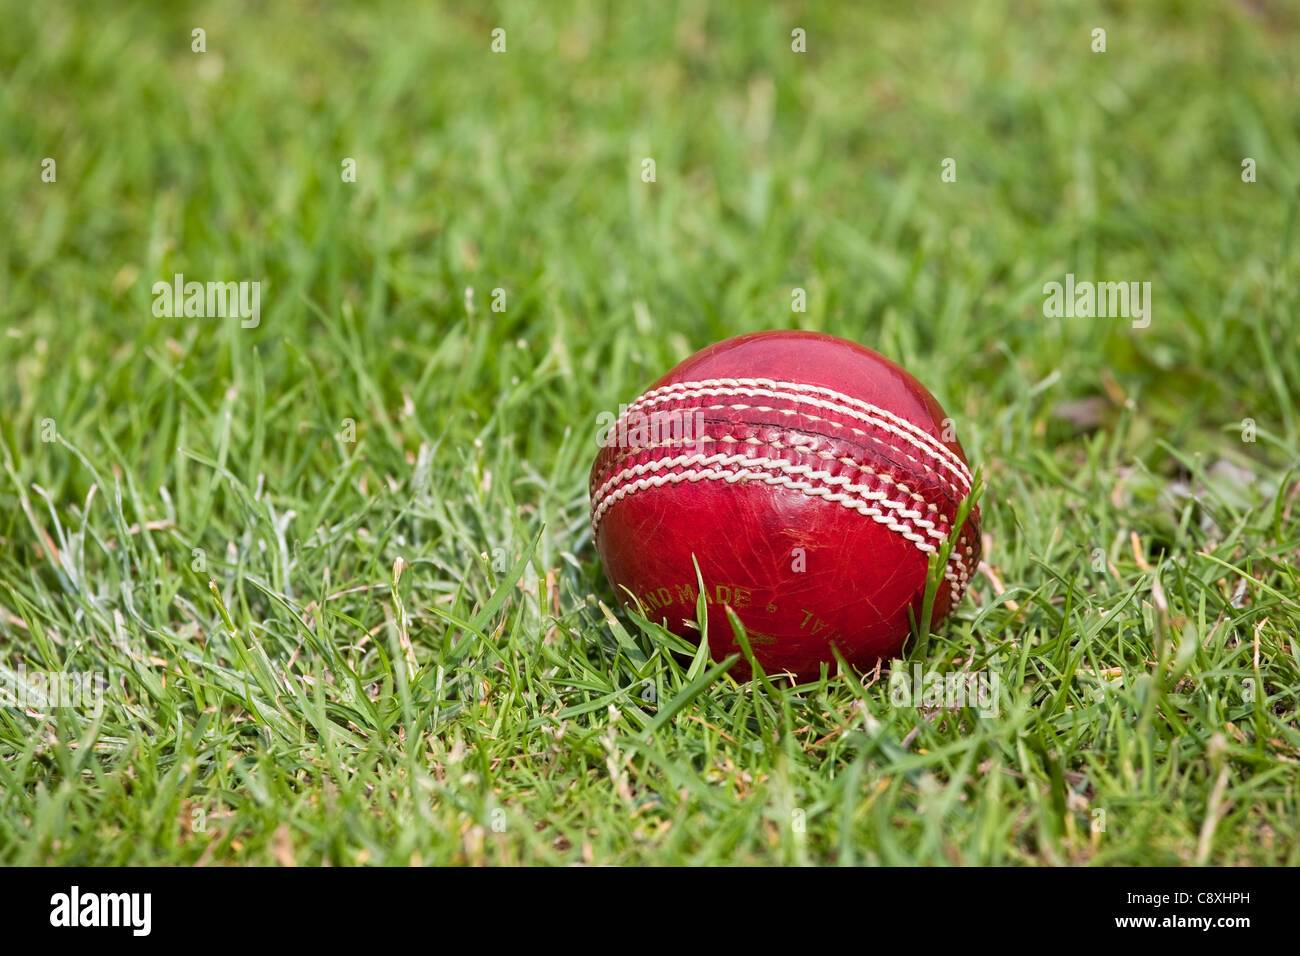 Red cricket ball on grass Stock Photo